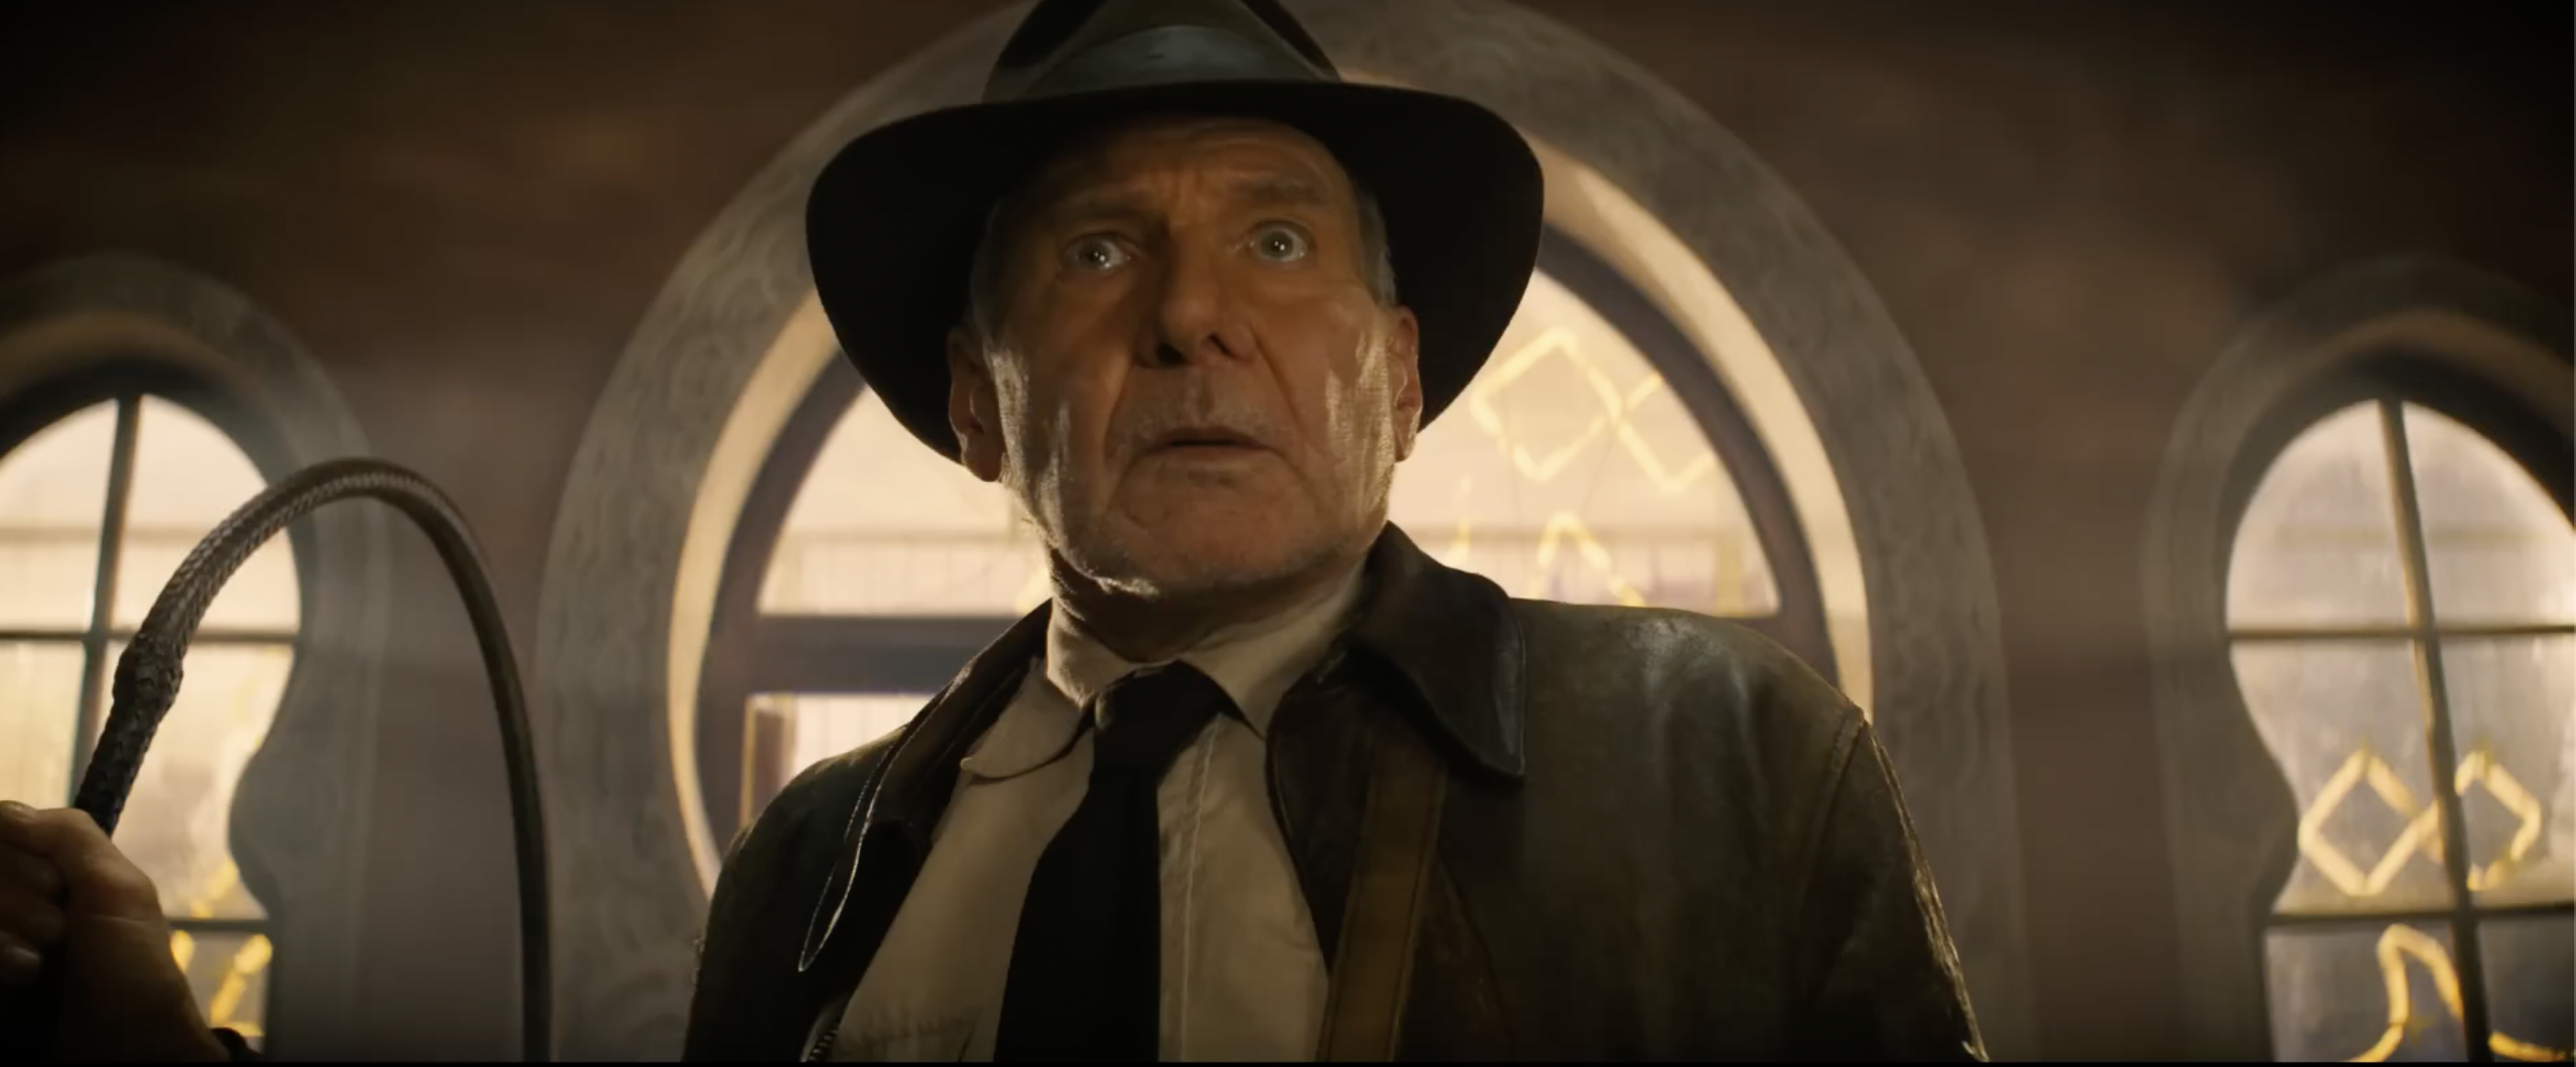 Harrison Ford as Indiana Jones in Indiana Jones and the Dial of Destiny. Courtesy of Disney, Paramount, and Lucasfilm.